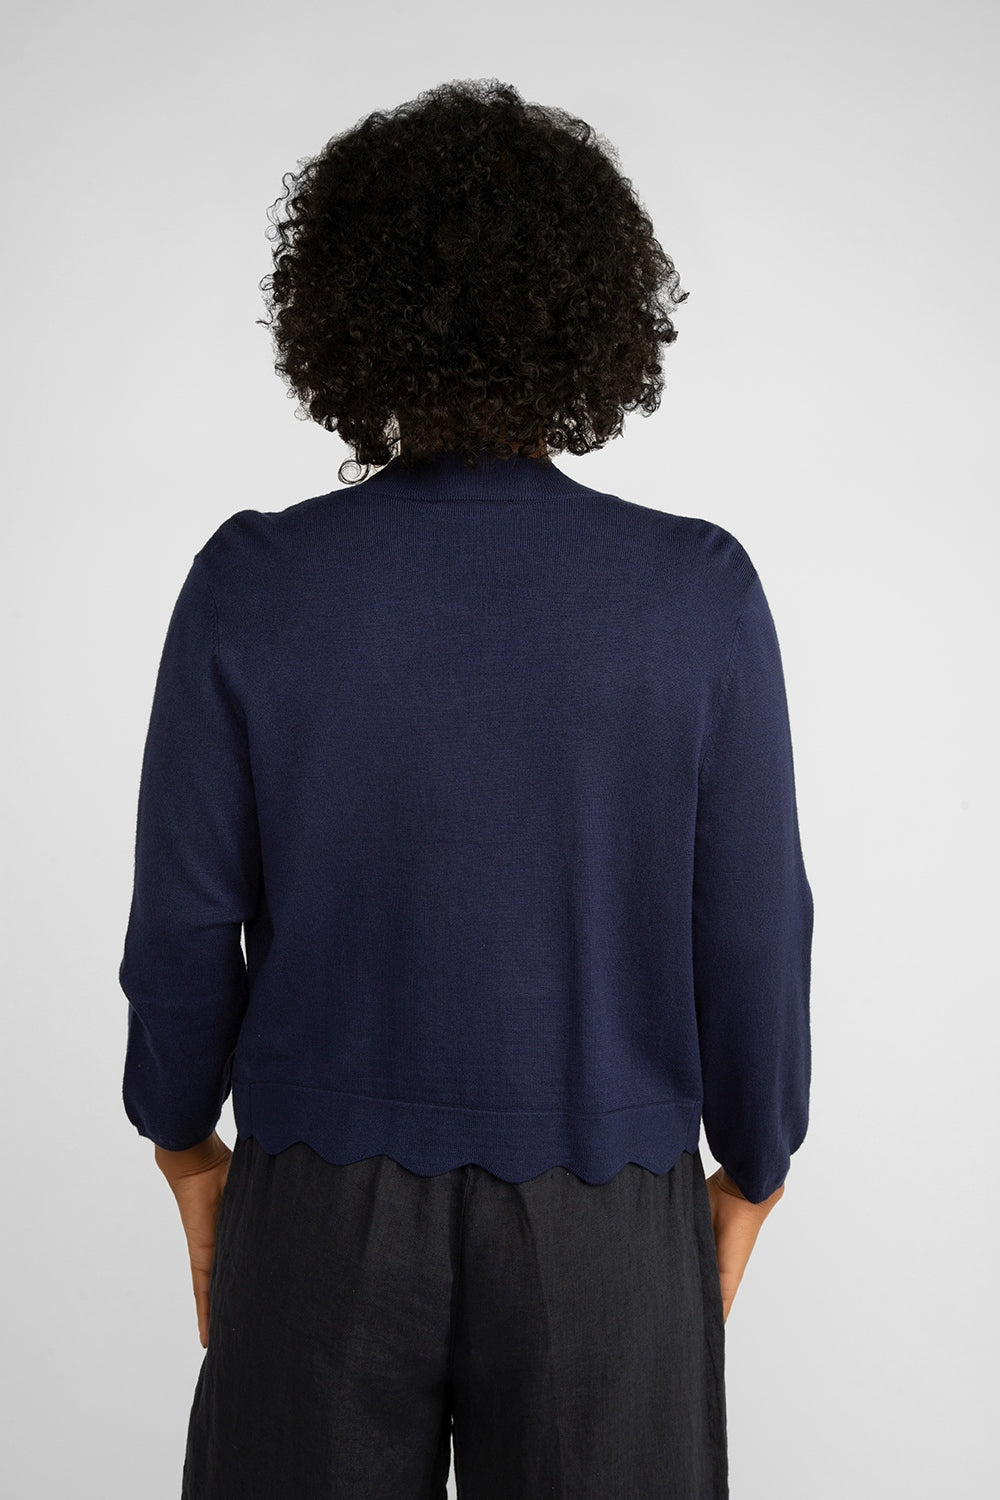 Back view of Carre Noir (6912) Women's Long Sleeve Lightweight Knit Open Front Cardigan with Scalloped Edges in Navy